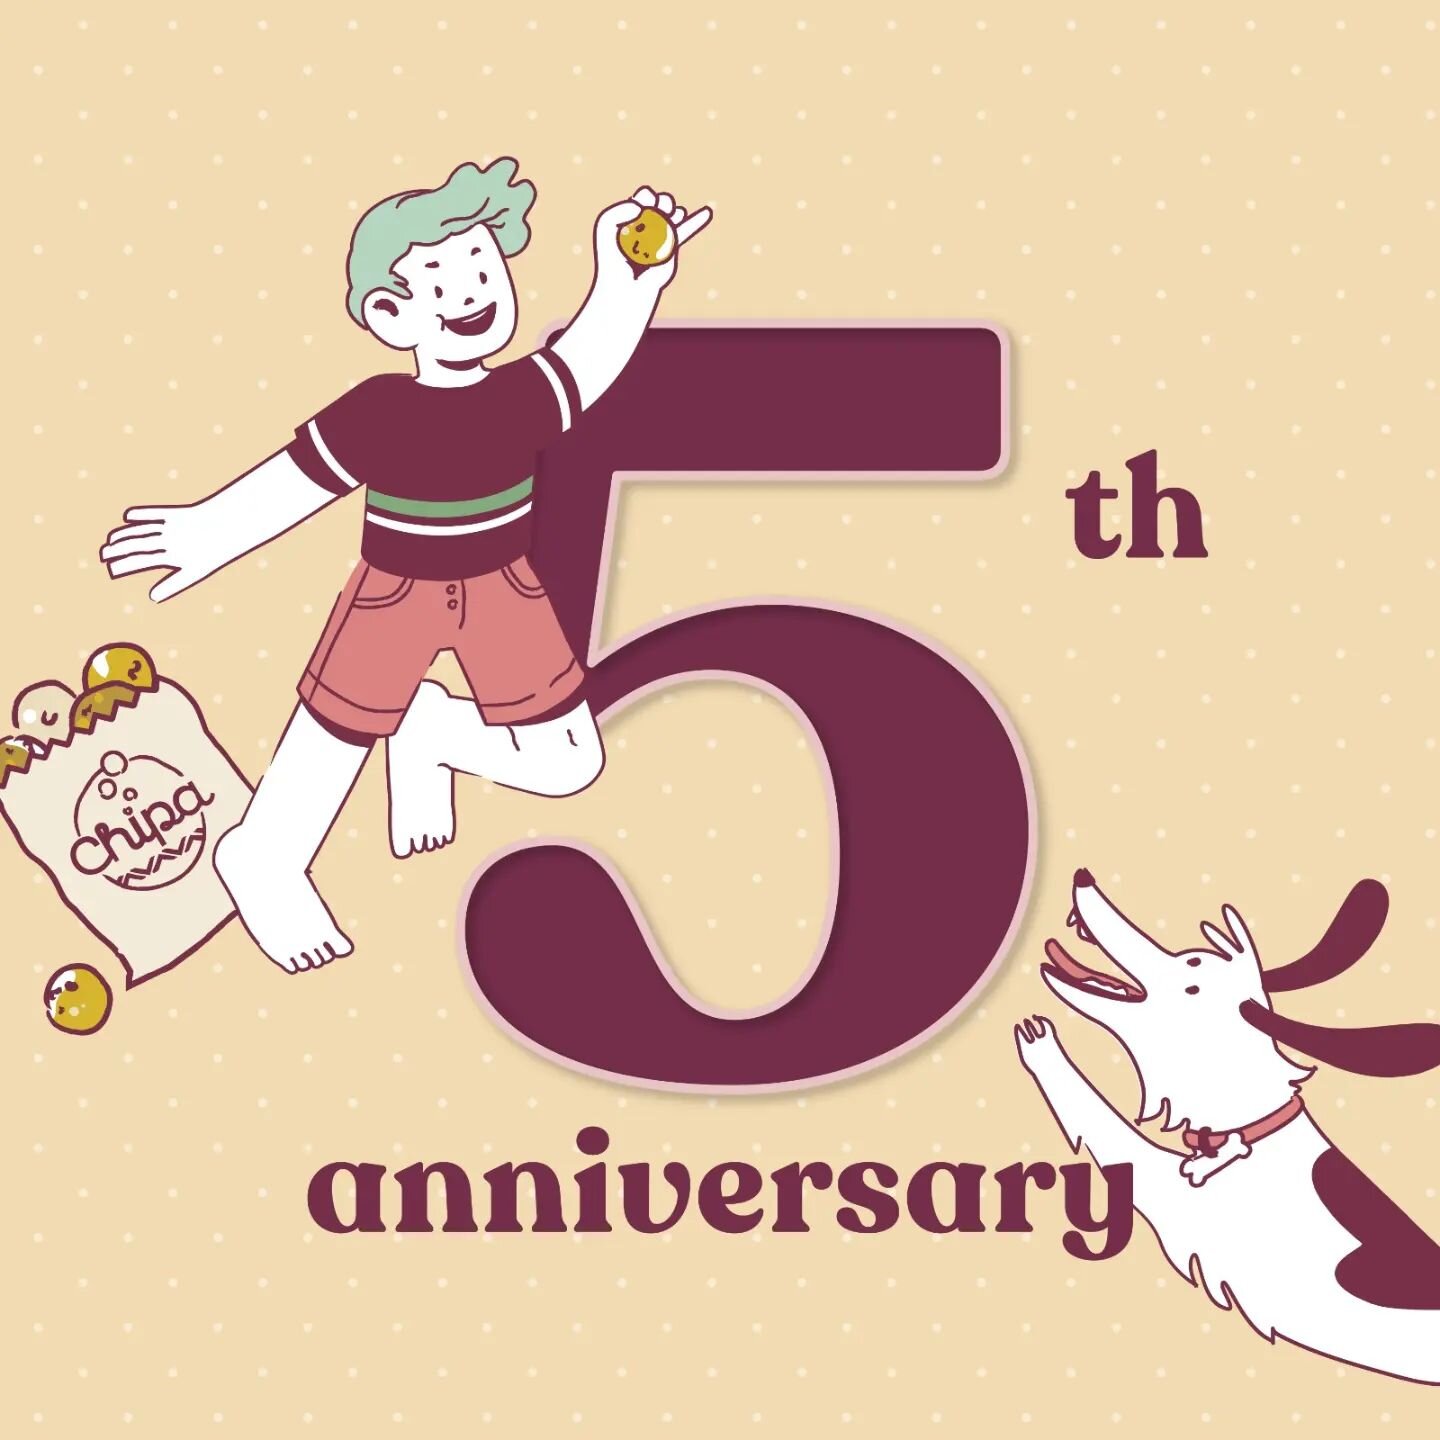 🥳🥳 Today is Chipa's 5th anniversary!  And we want to celebrate with you with a special offer (details below).

We want to thank our customers, partners and friends for spreading the joy of chipas every day since 2017. 🤗🤗

Starting tomorrow 8.8, a